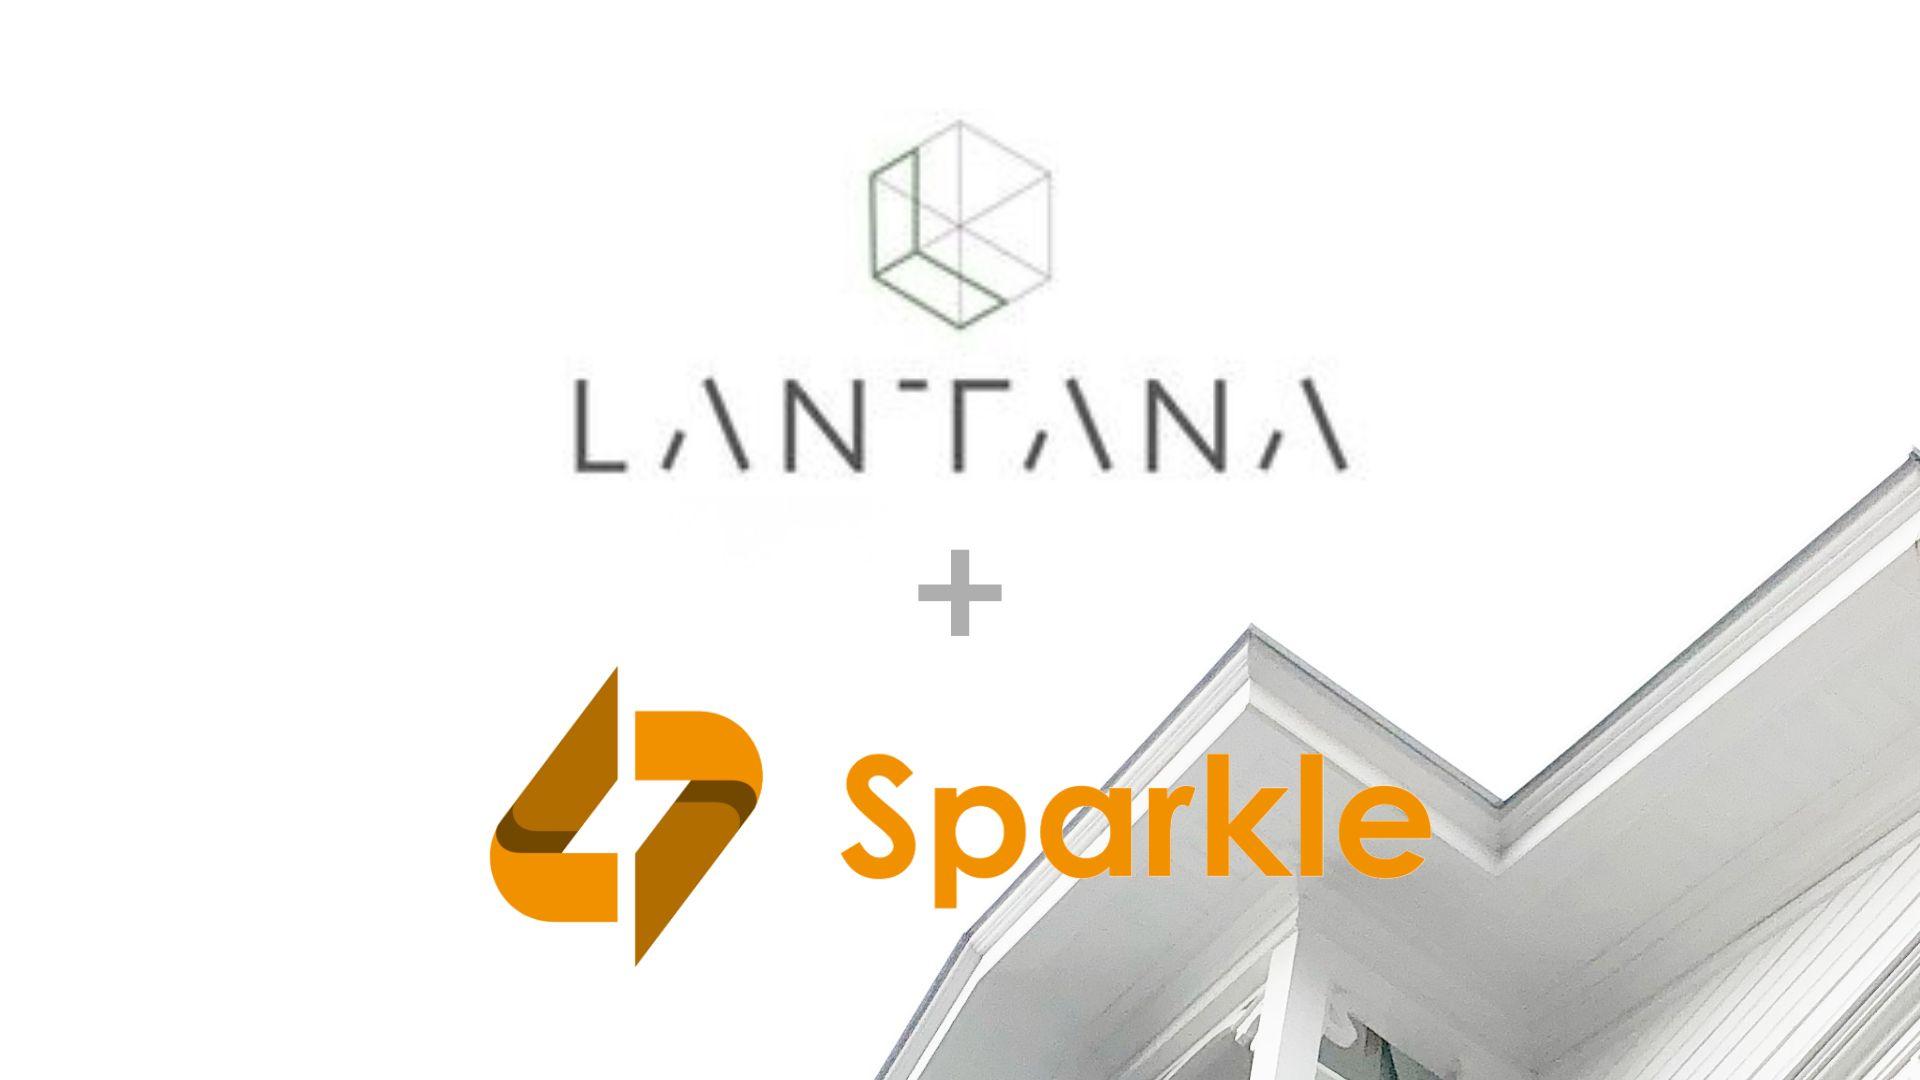 Sparkle and Lantana join forces